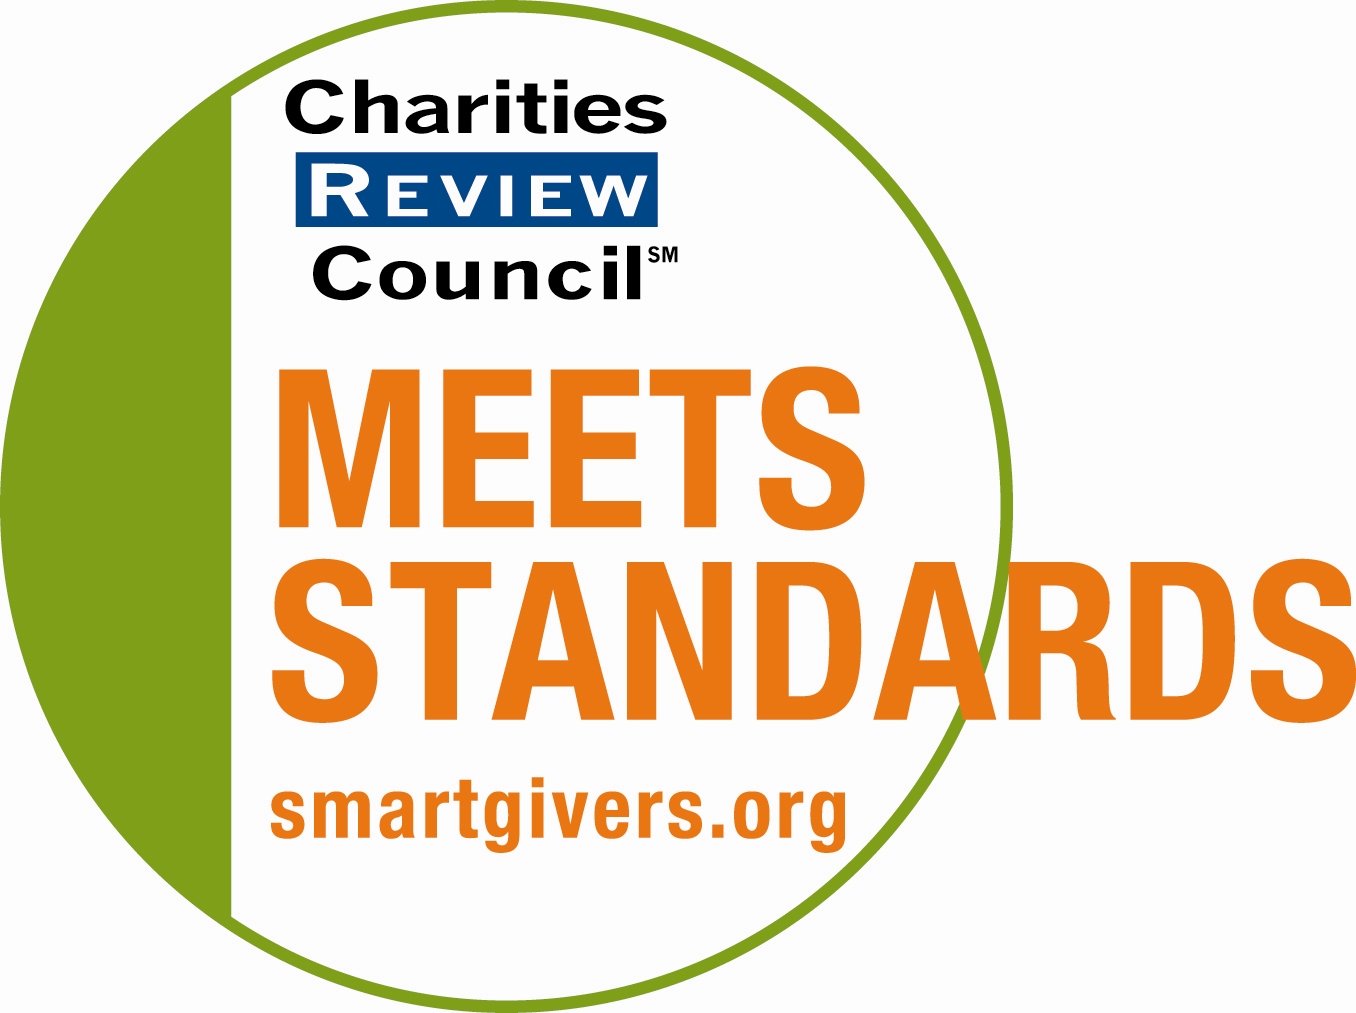 charities review council